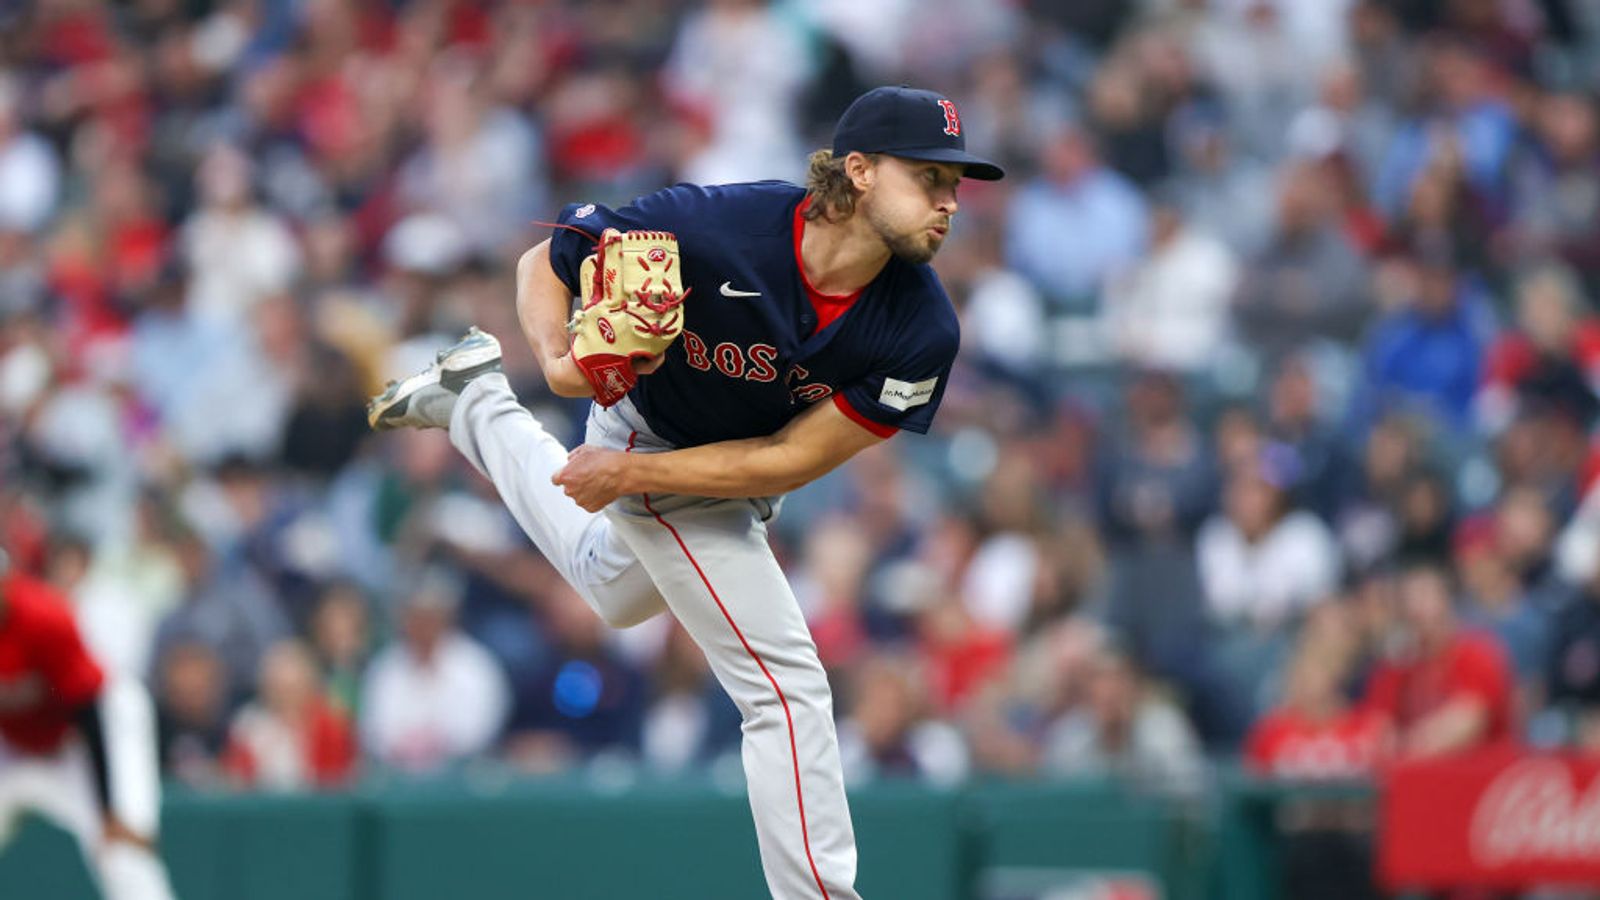 Red Sox lefthander Brandon Walter, expected to make his big league